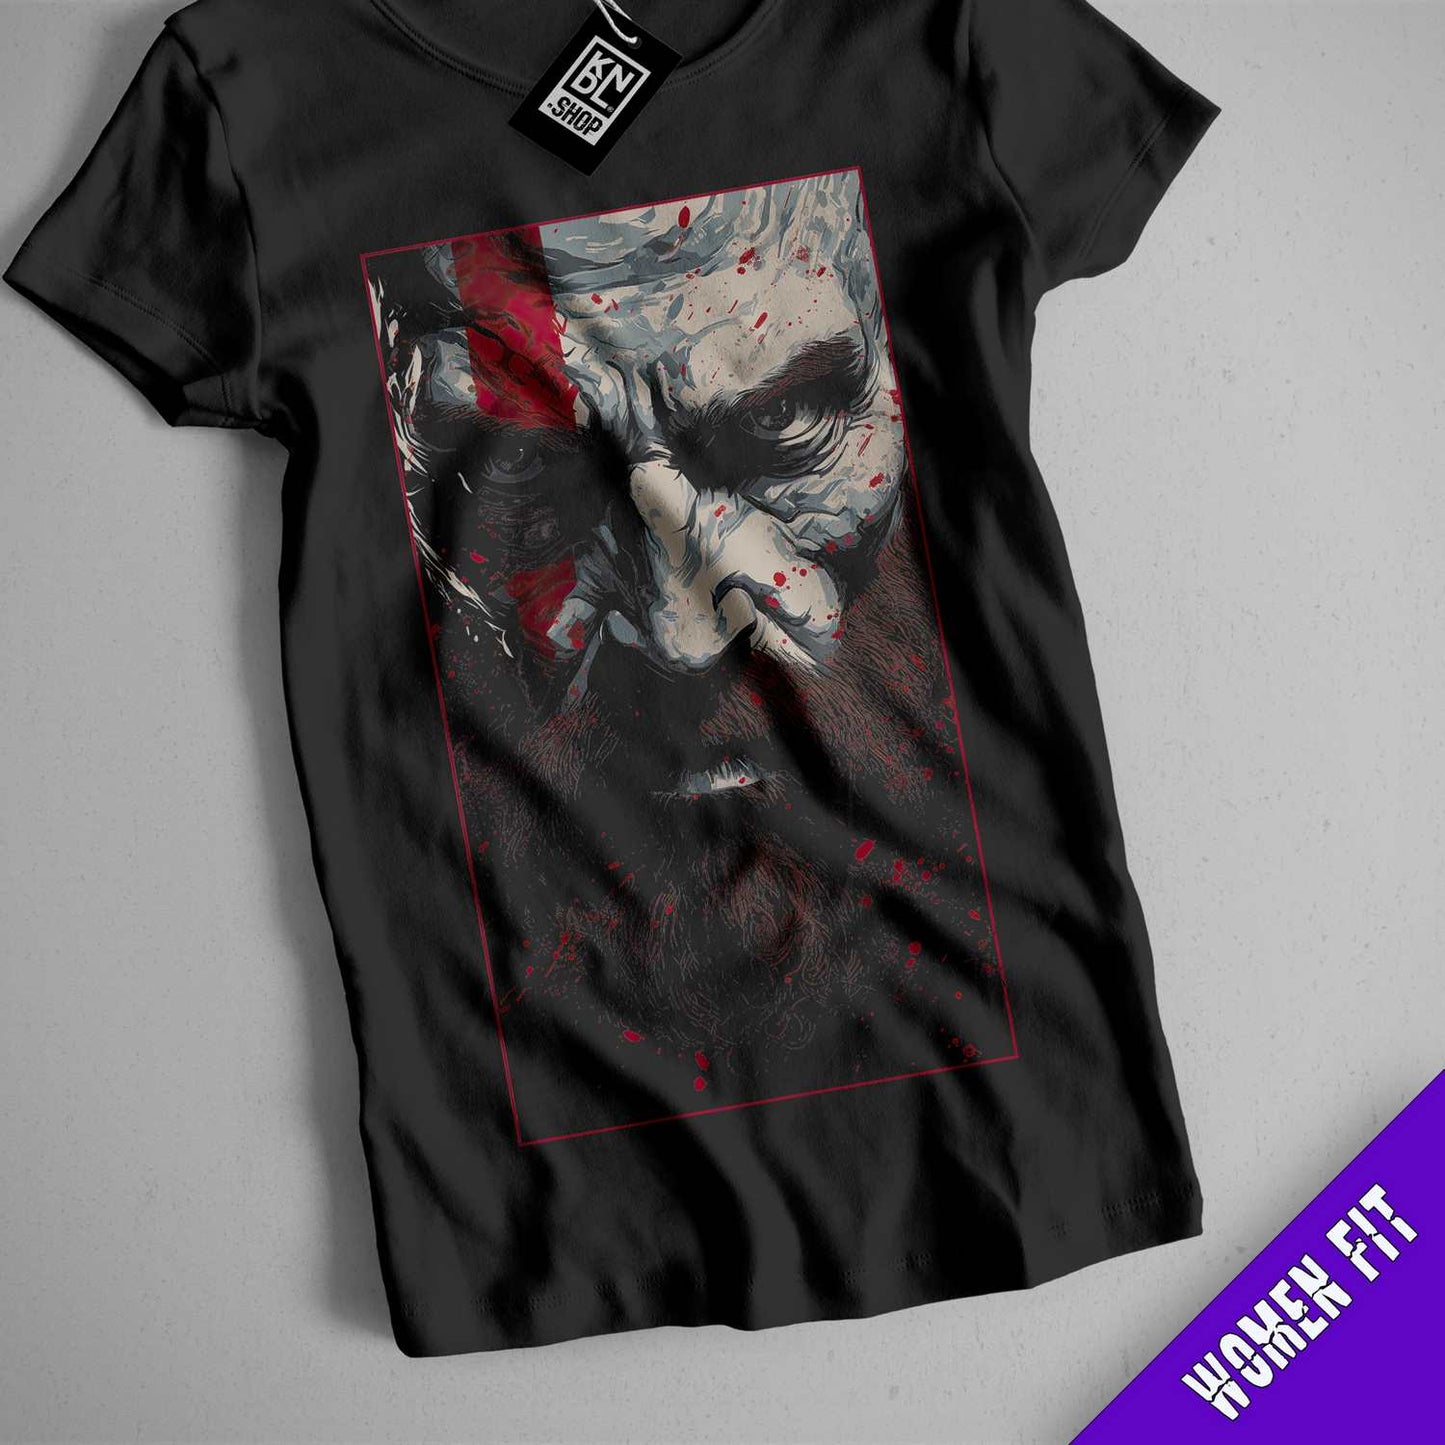 a black t - shirt with a picture of a clown smoking a cigarette